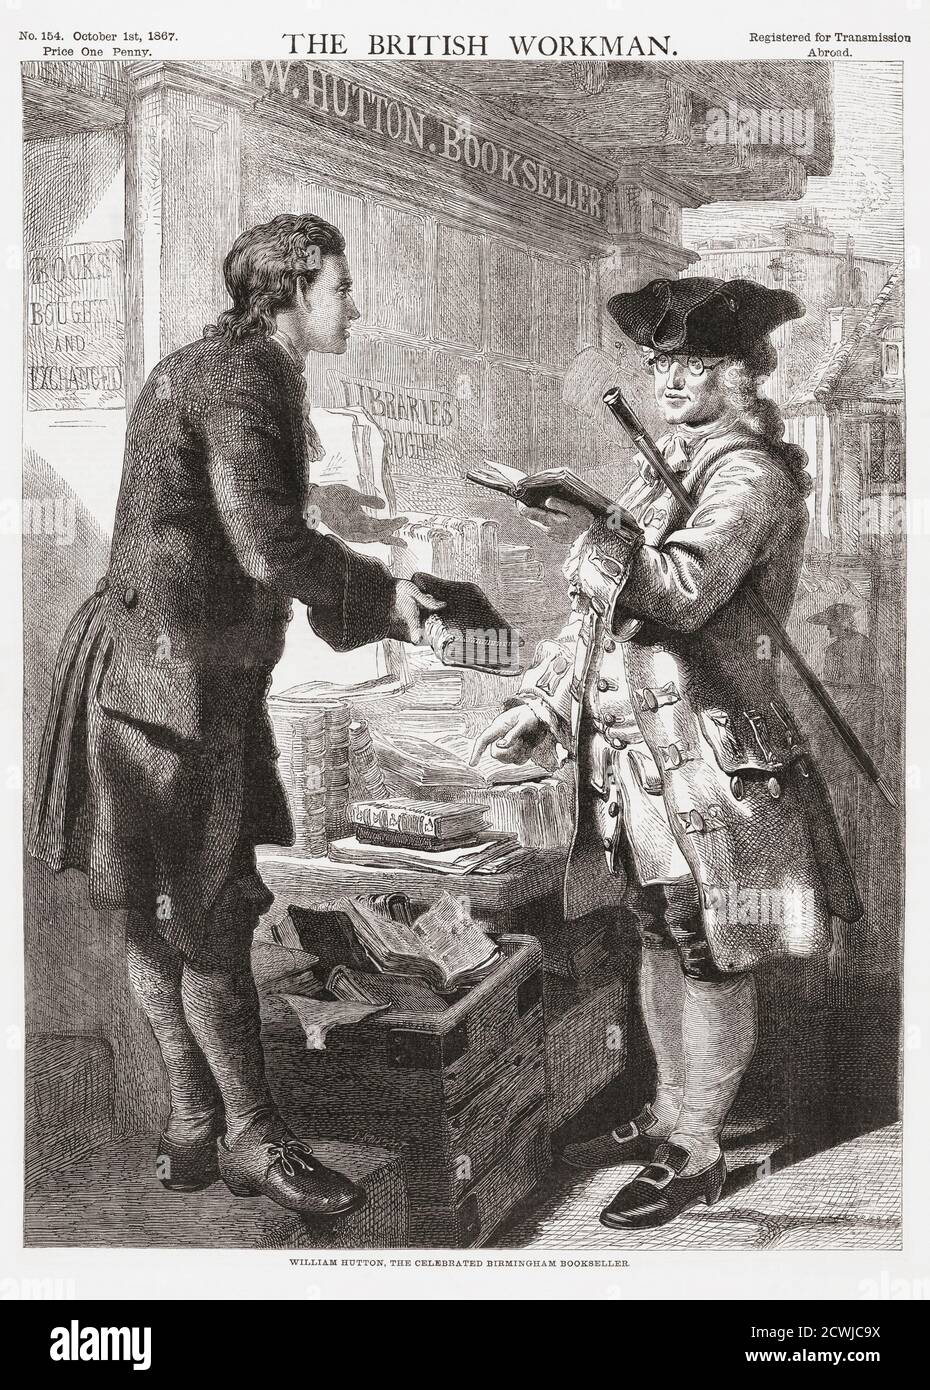 William Hutton selling a customer a book outside his Birmingham shop.  William Hutton, 1723 - 1815. English bookseller, poet, historian and travel writer.  He was the first important historian of the city of Birmingham and authored a book, History of Birmingham, in 1781.  After an engraving by an unknown artist on the front cover of The British Workman, published October I, 1867. Stock Photo